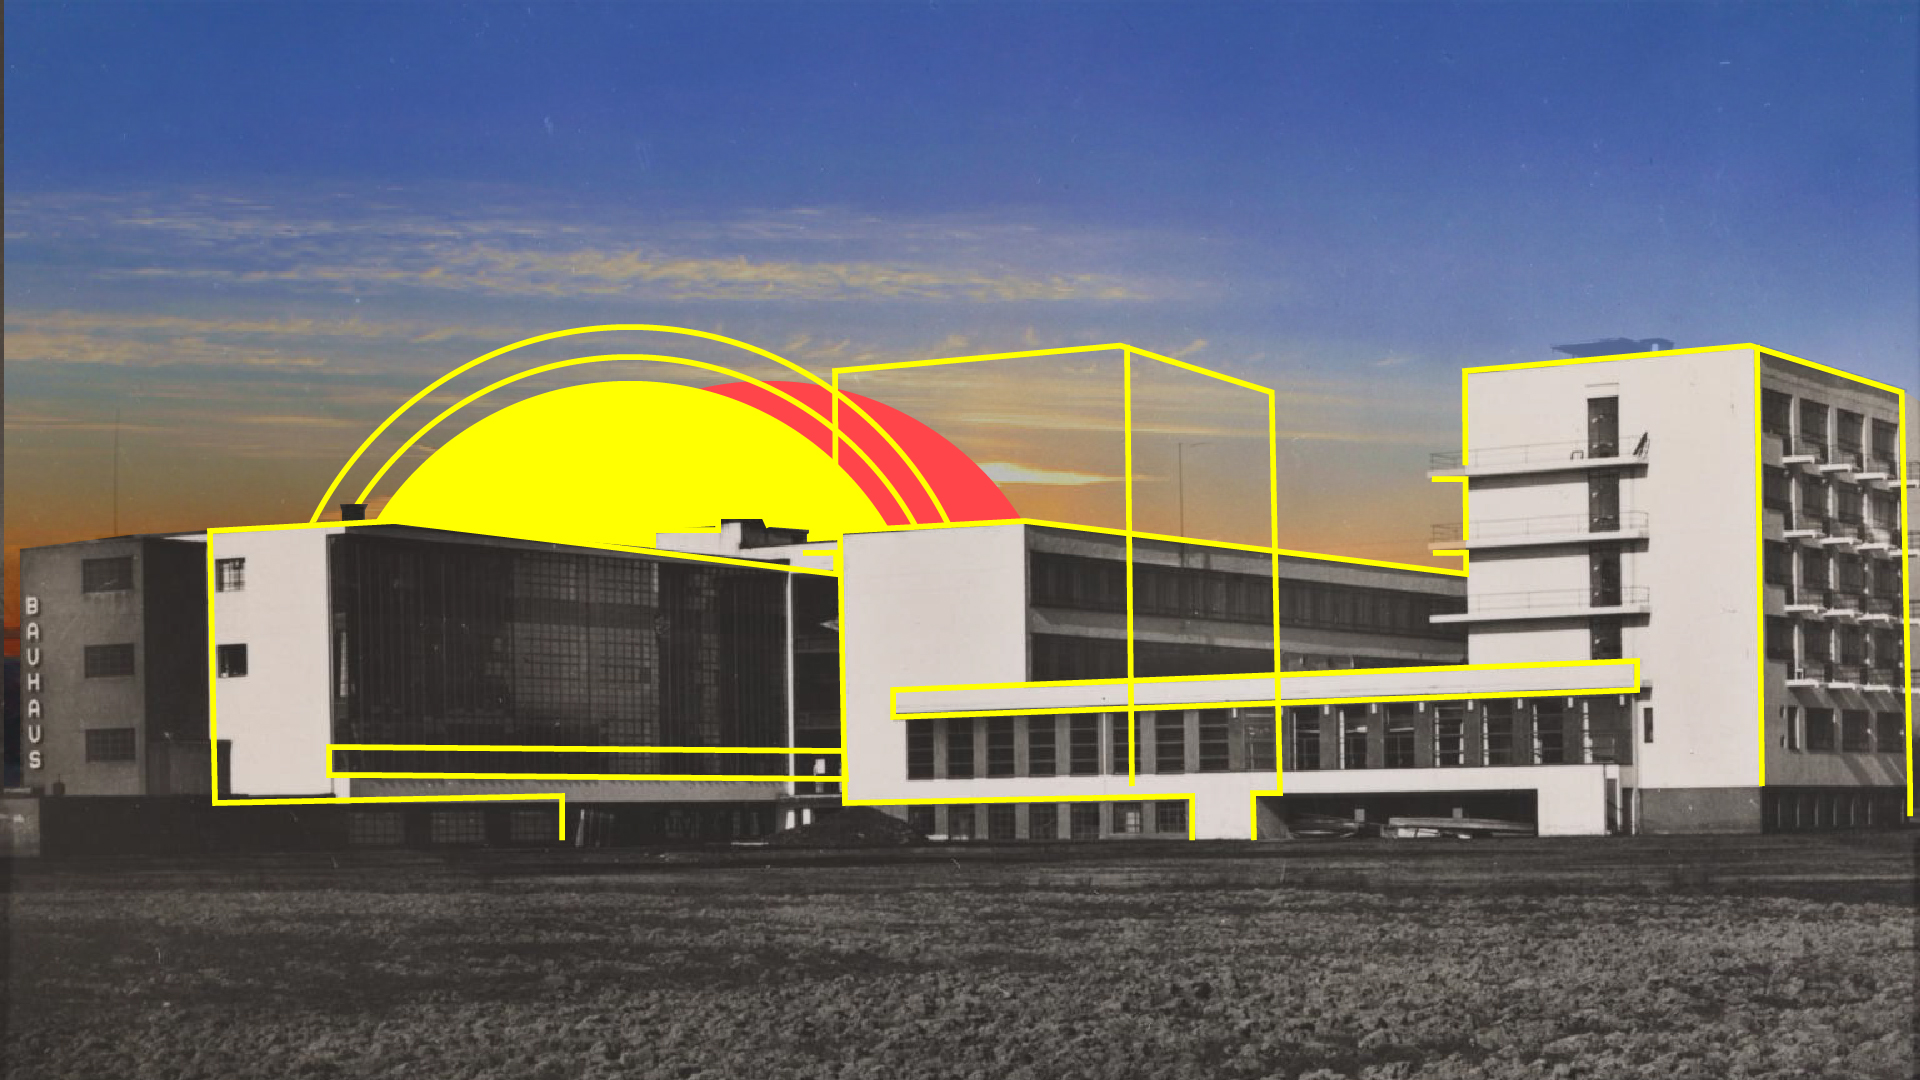 An image of a bauhaus designed building with a yellow outline